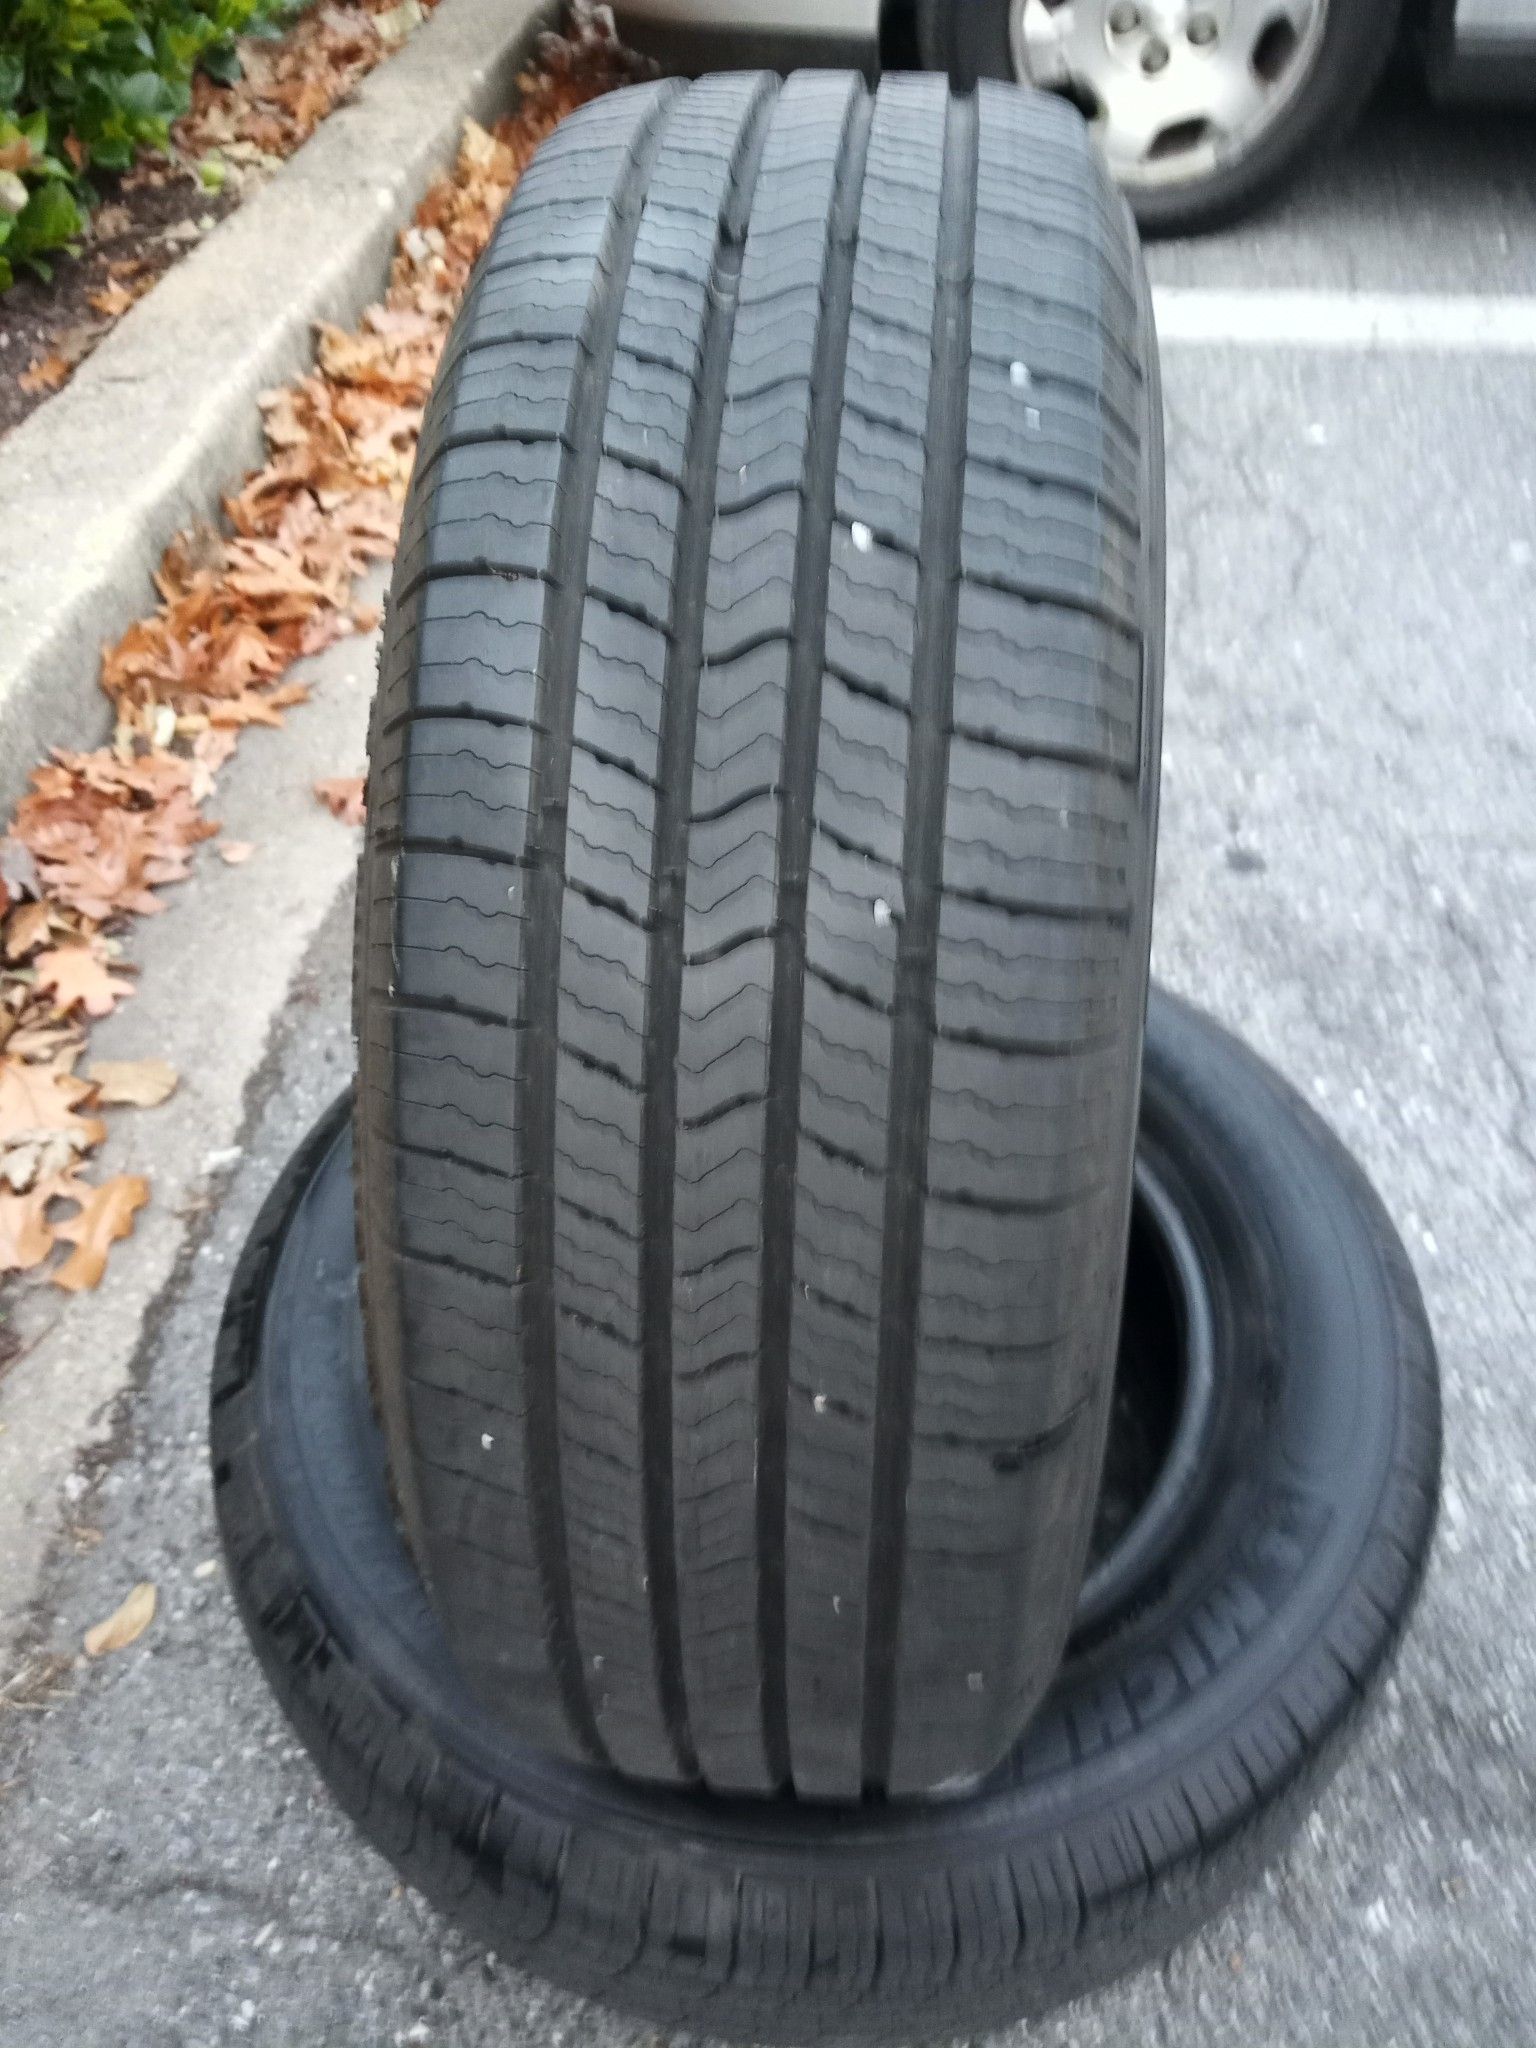 Two Used Michelin Defender All Season Tires.